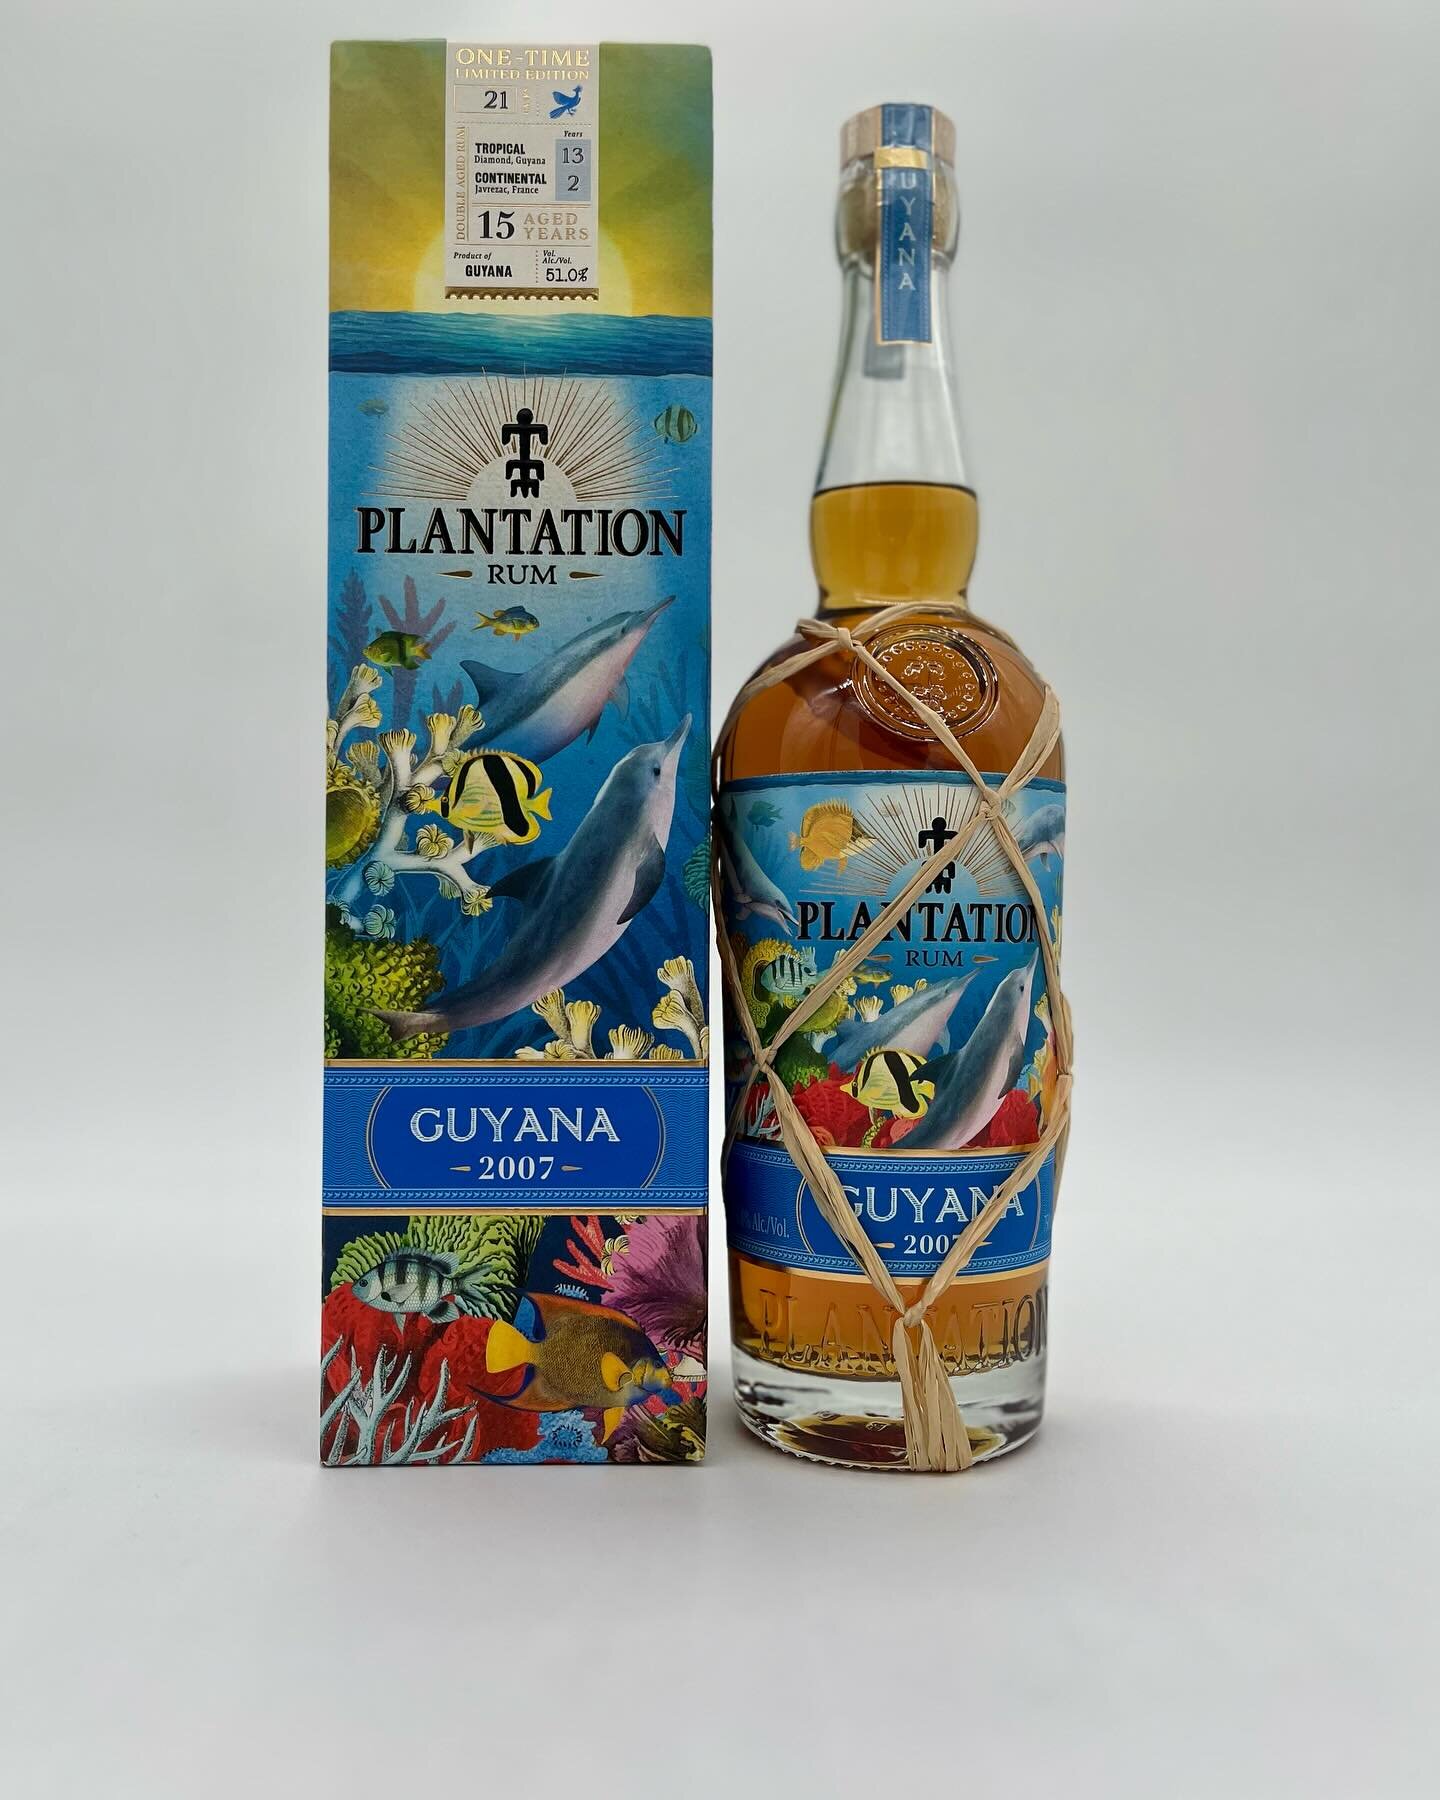 &ldquo;For more than 30 years, Plantation Rum Master Blender Alexandre Gabriel has explored the world of rum and its various terroirs in search of the best casks. Passionate about the history, heritage and particular production methods of each rum-pr